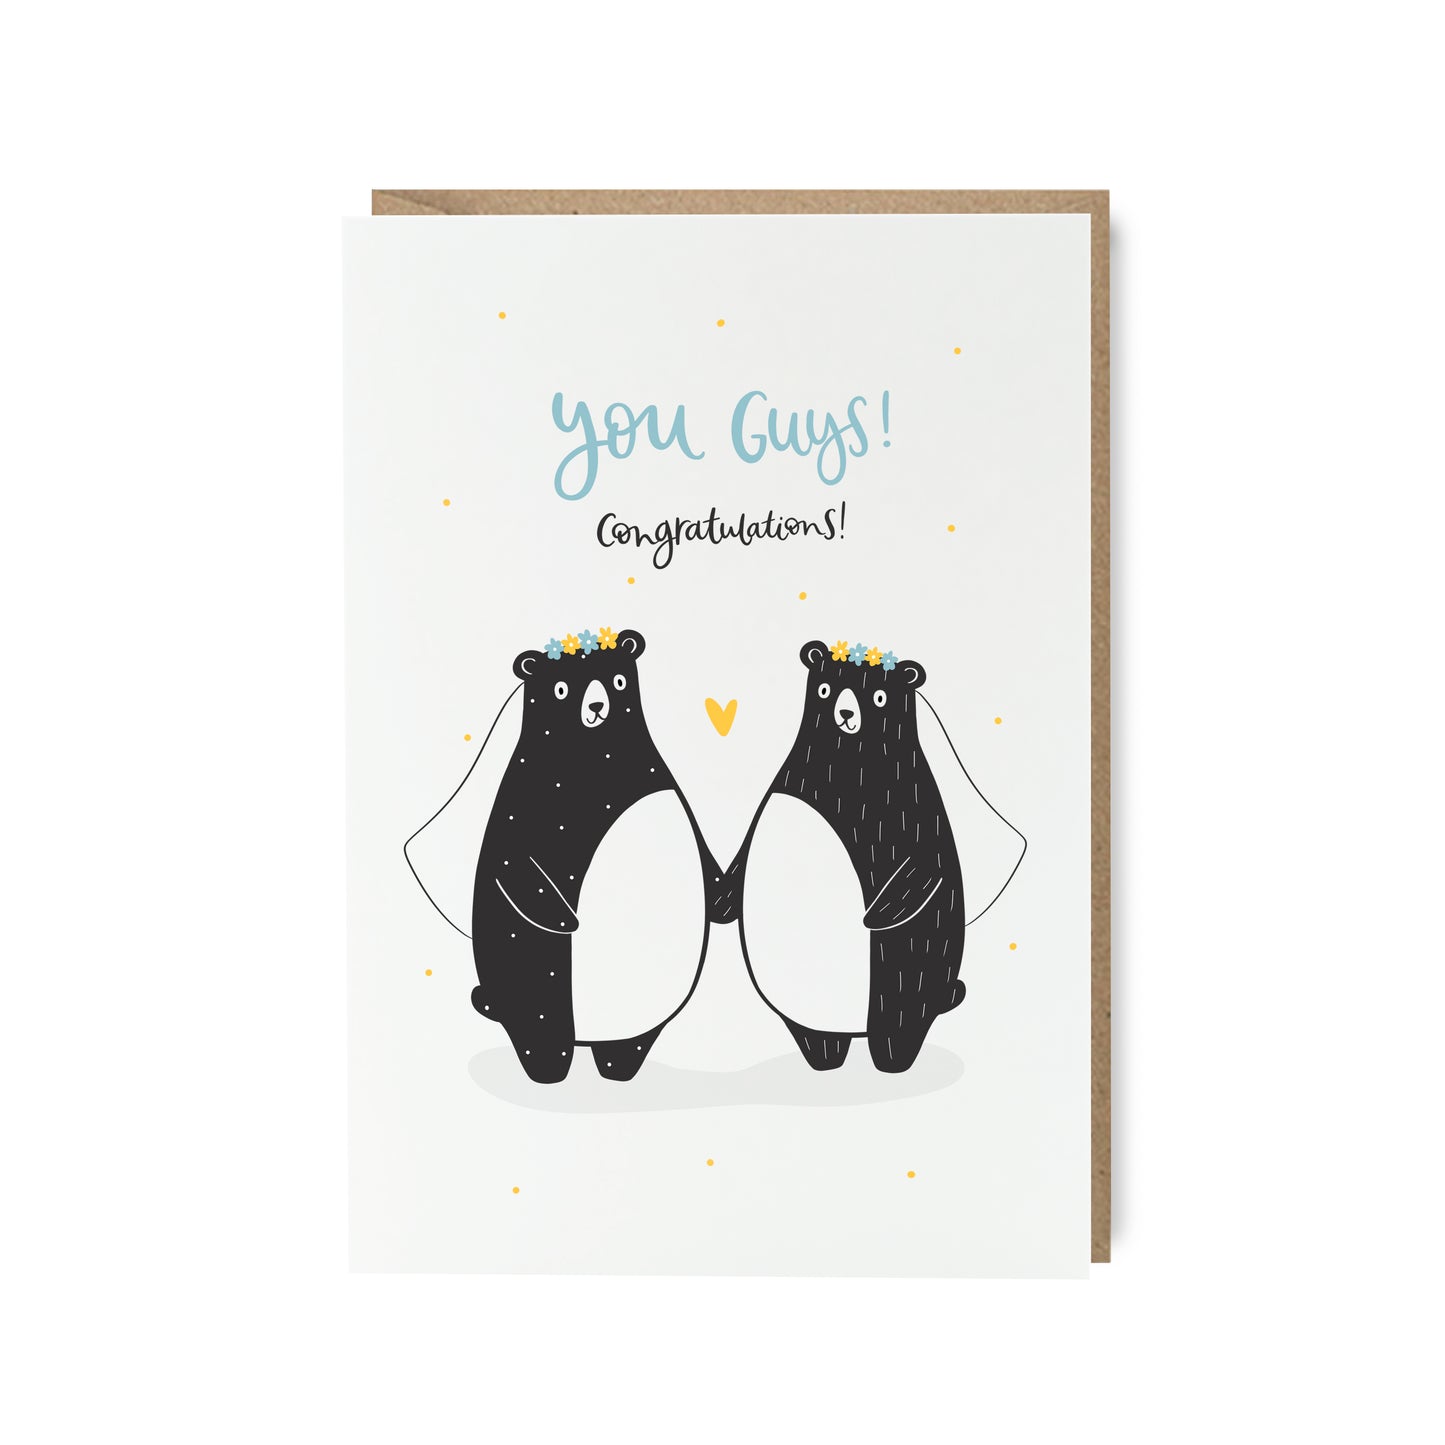 Mrs and mrs bears wedding engagement card by abbie imagine